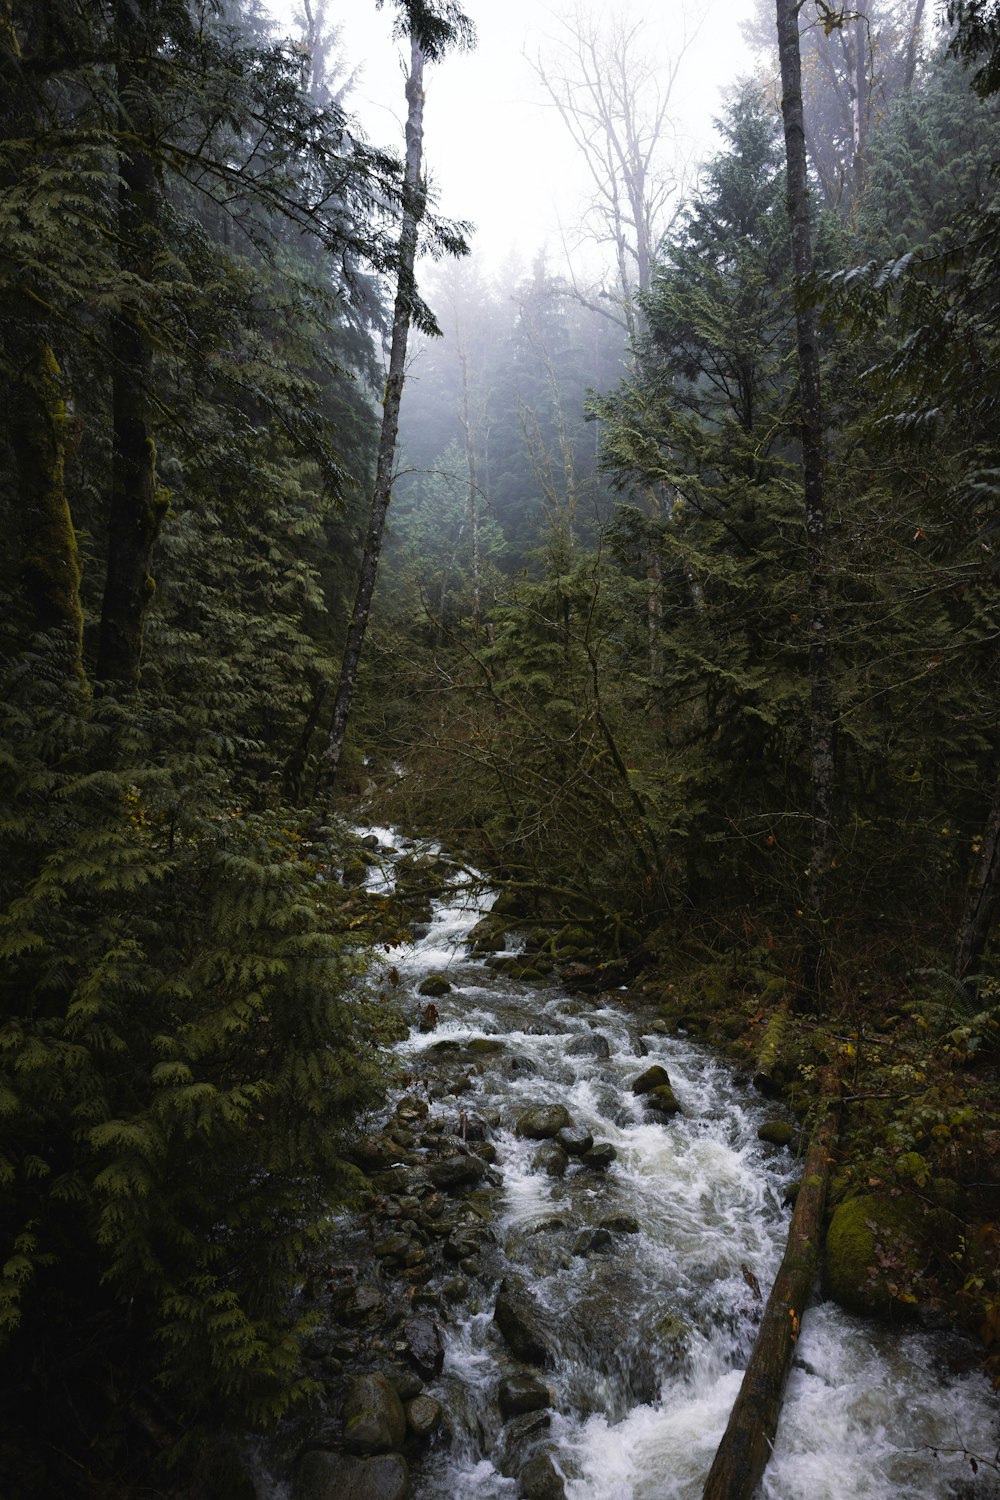 a stream running through a forest filled with trees